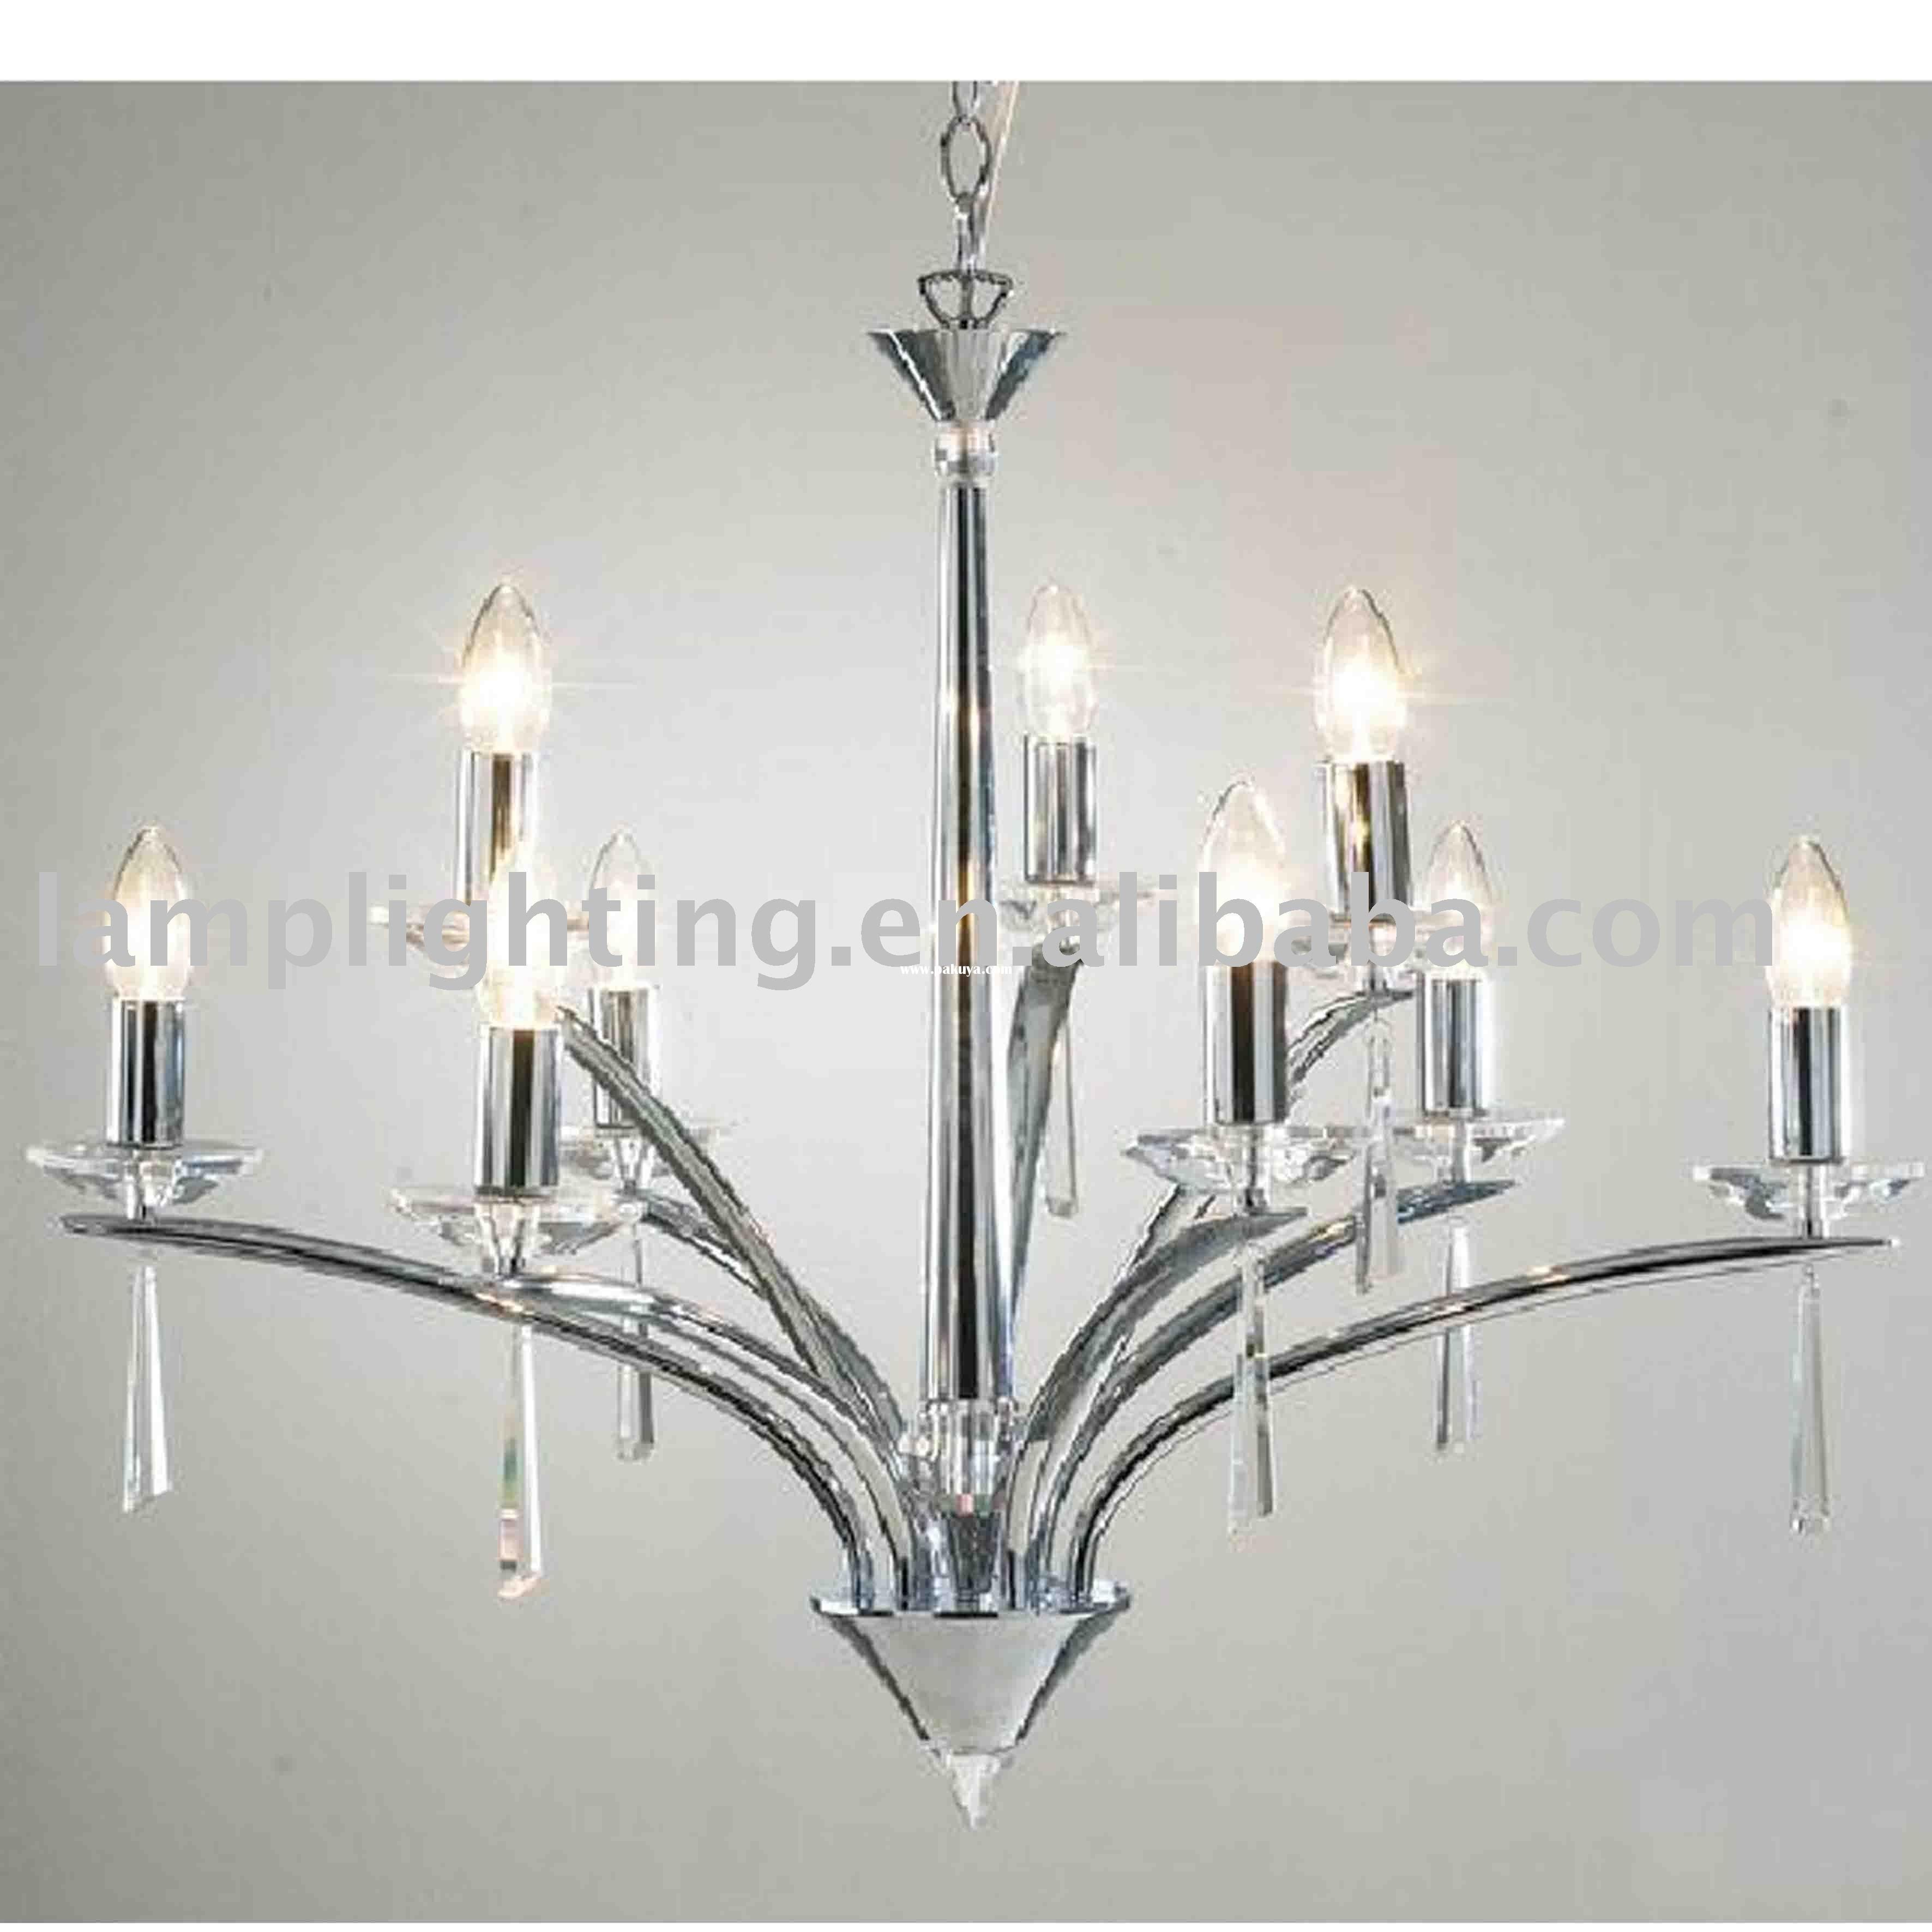 Modern White Chandelier With Regard To Modern Chrome Chandeliers (View 6 of 12)